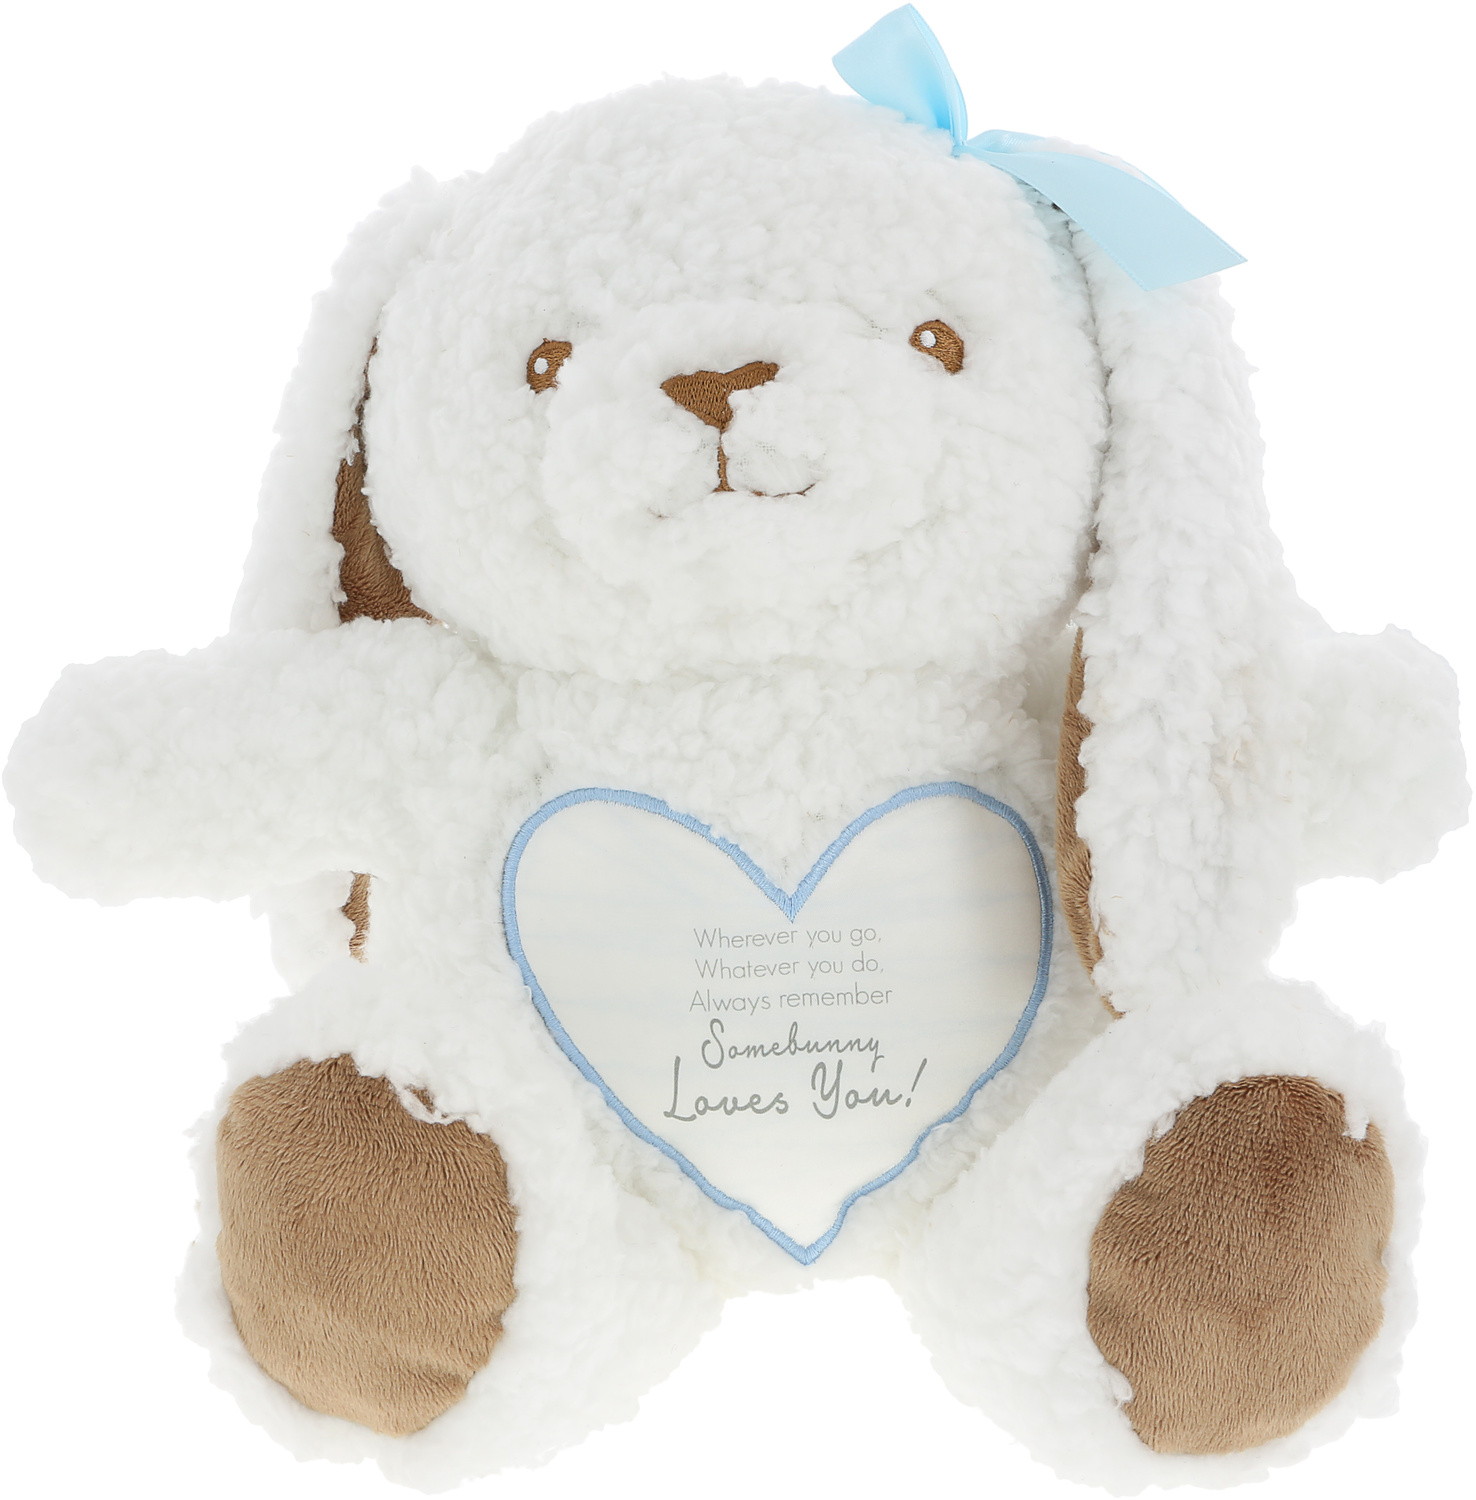 Somebunny Blue Plush by Comfort Collection - Somebunny Blue Plush - 9.5" Plush Bunny